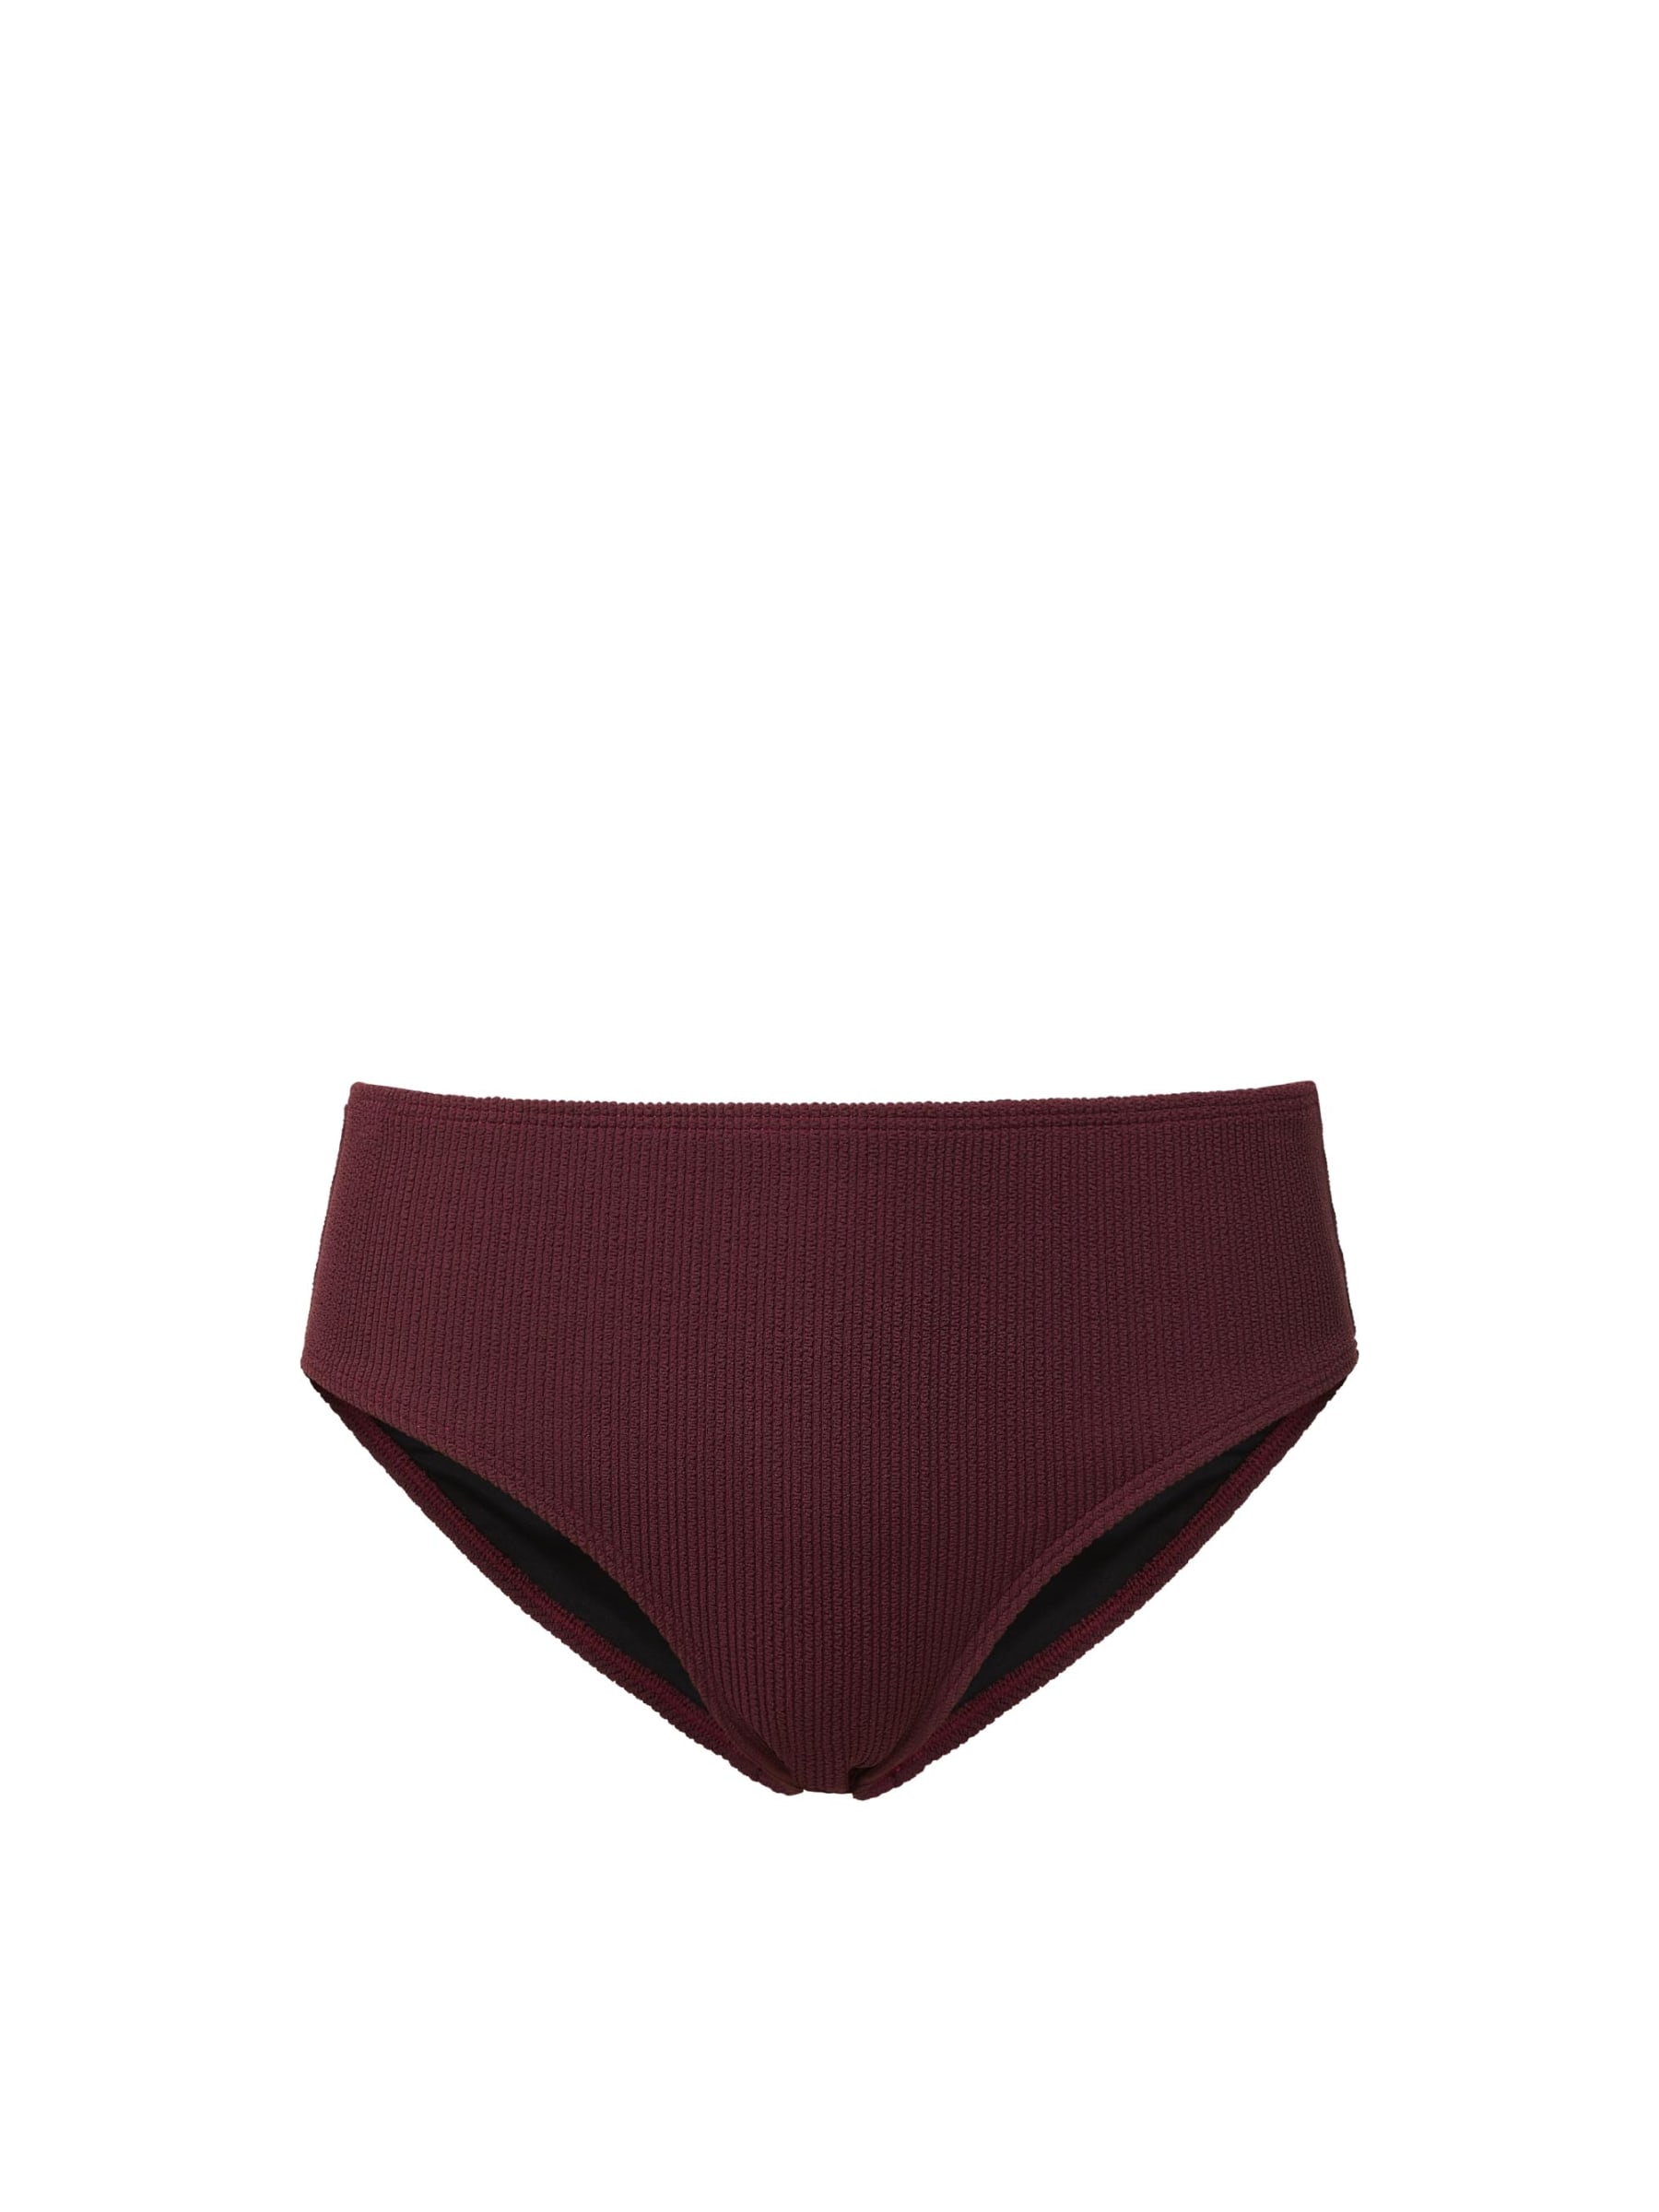 Shop Change Of Scenery Women's Red / Brown Classic Midrise Bottom - Auburn Texture In Red/brown